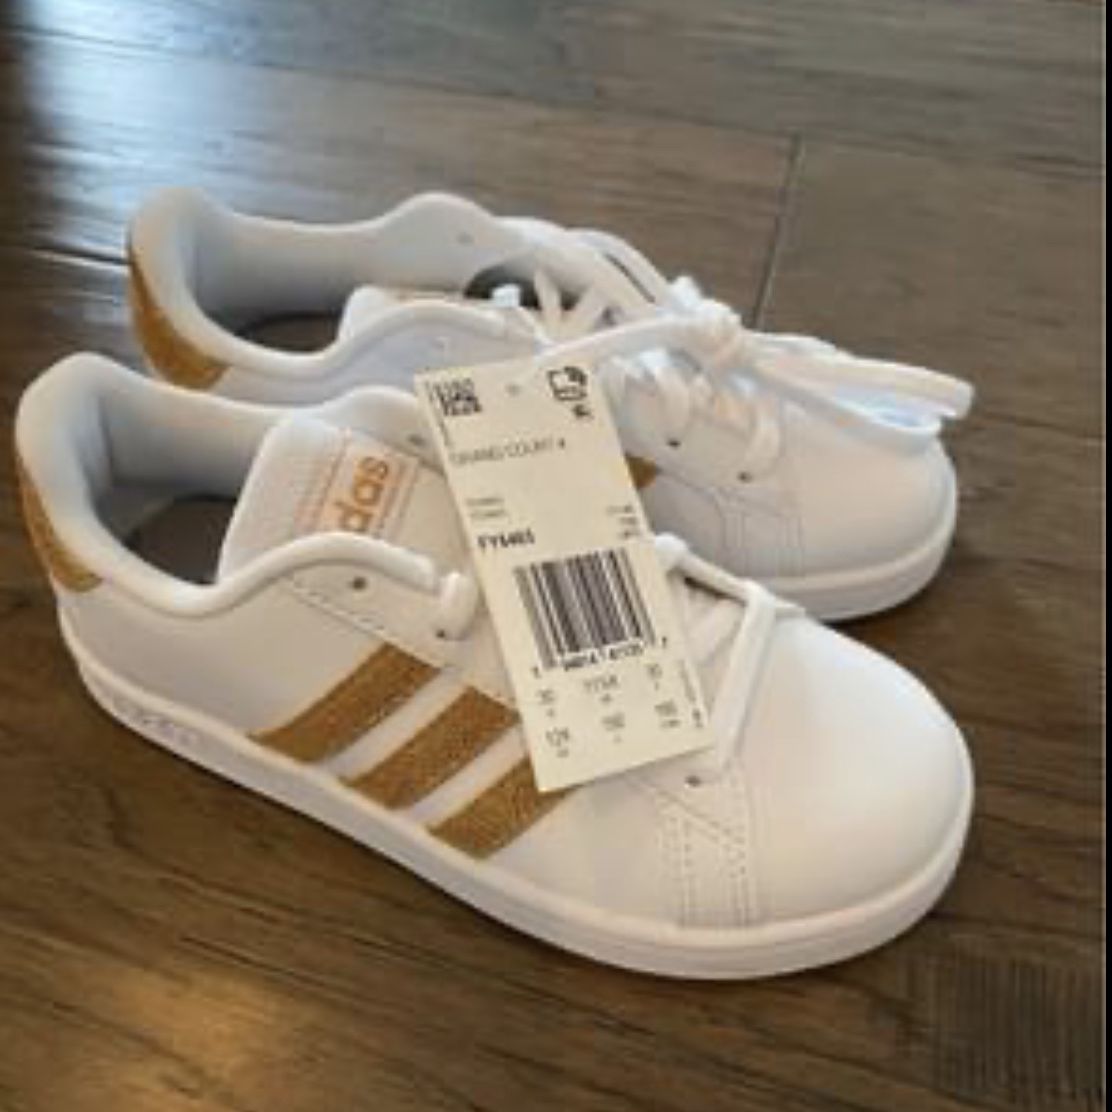 Adidas Size 12 - Grand Court Style NEW with TAGS for Sale in Camas, WA - OfferUp